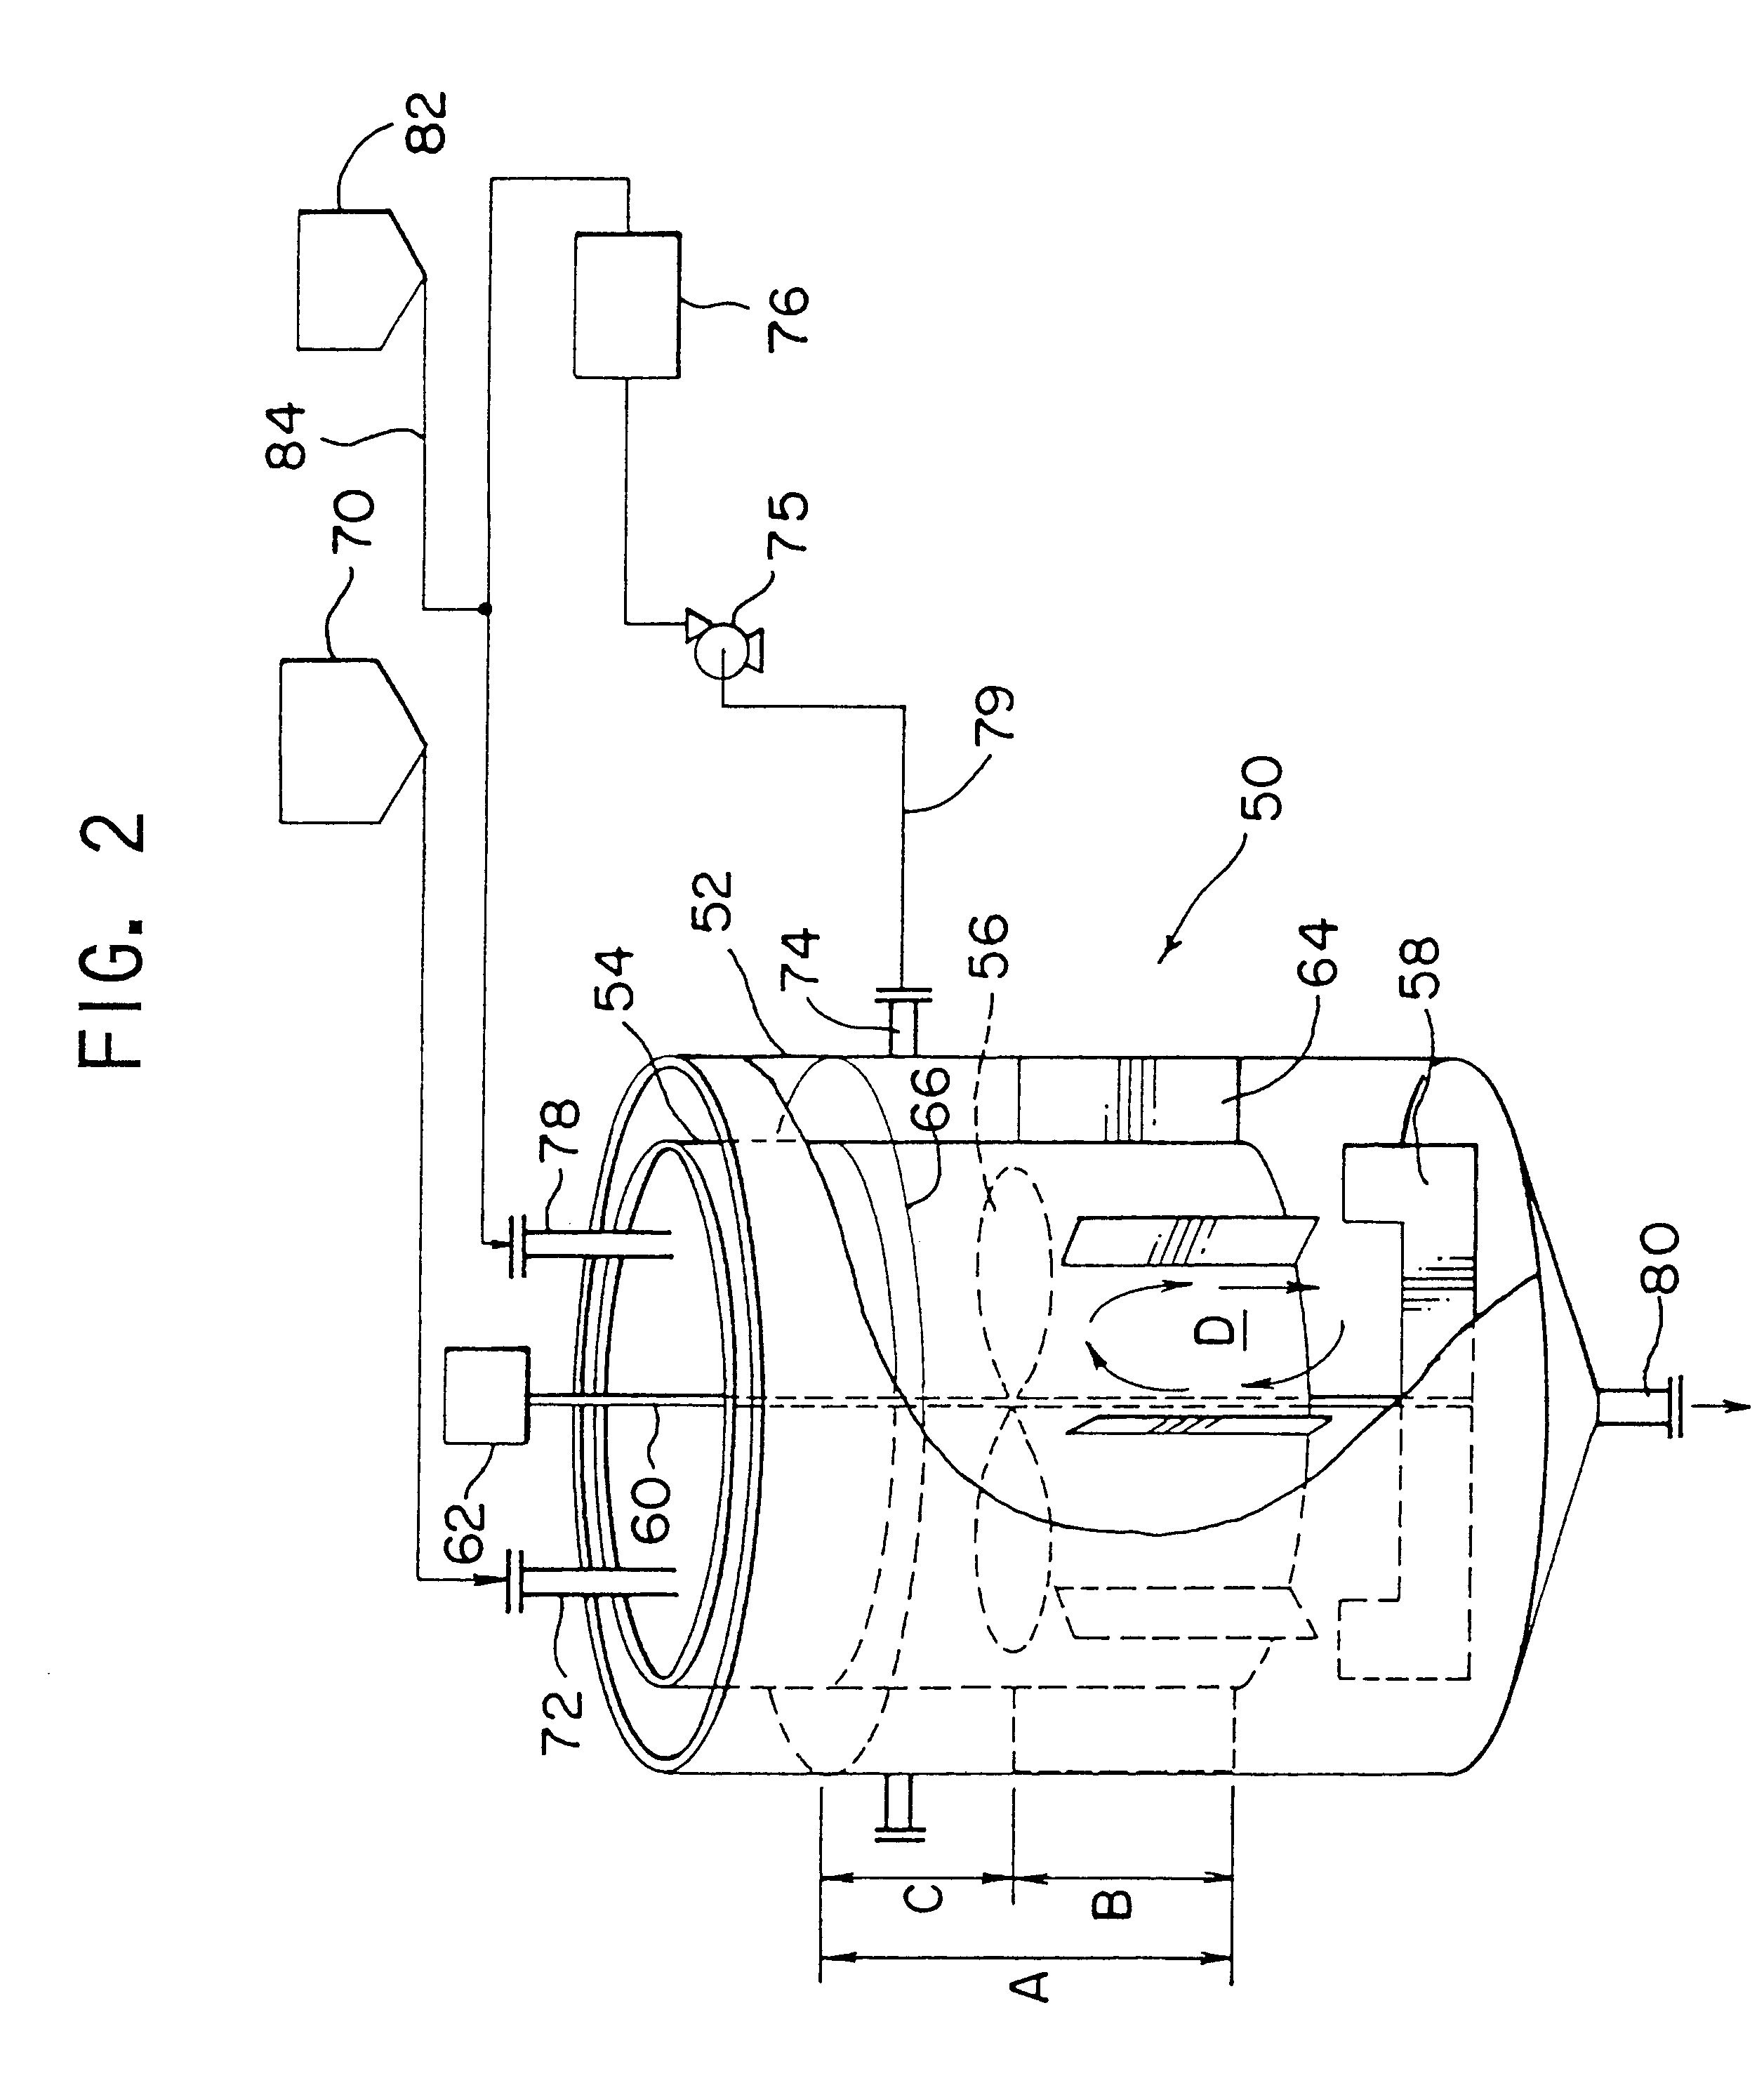 Apparatus and method for crystallization